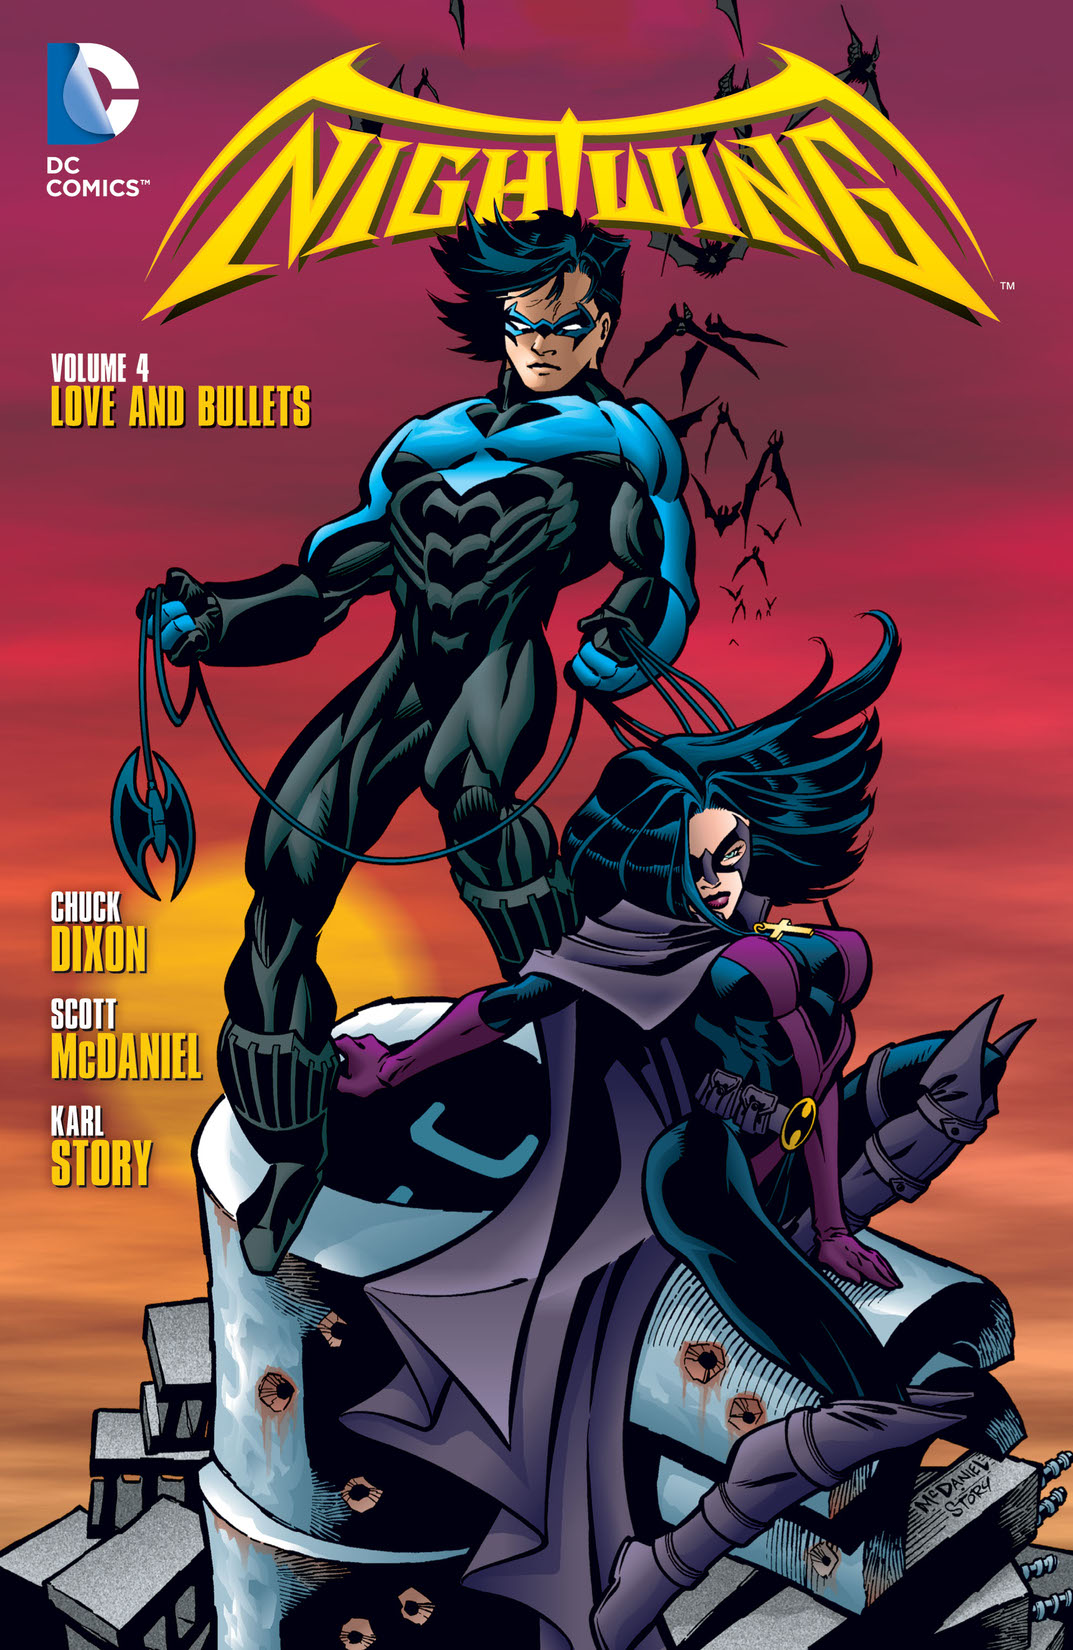 Nightwing Vol. 4 preview images